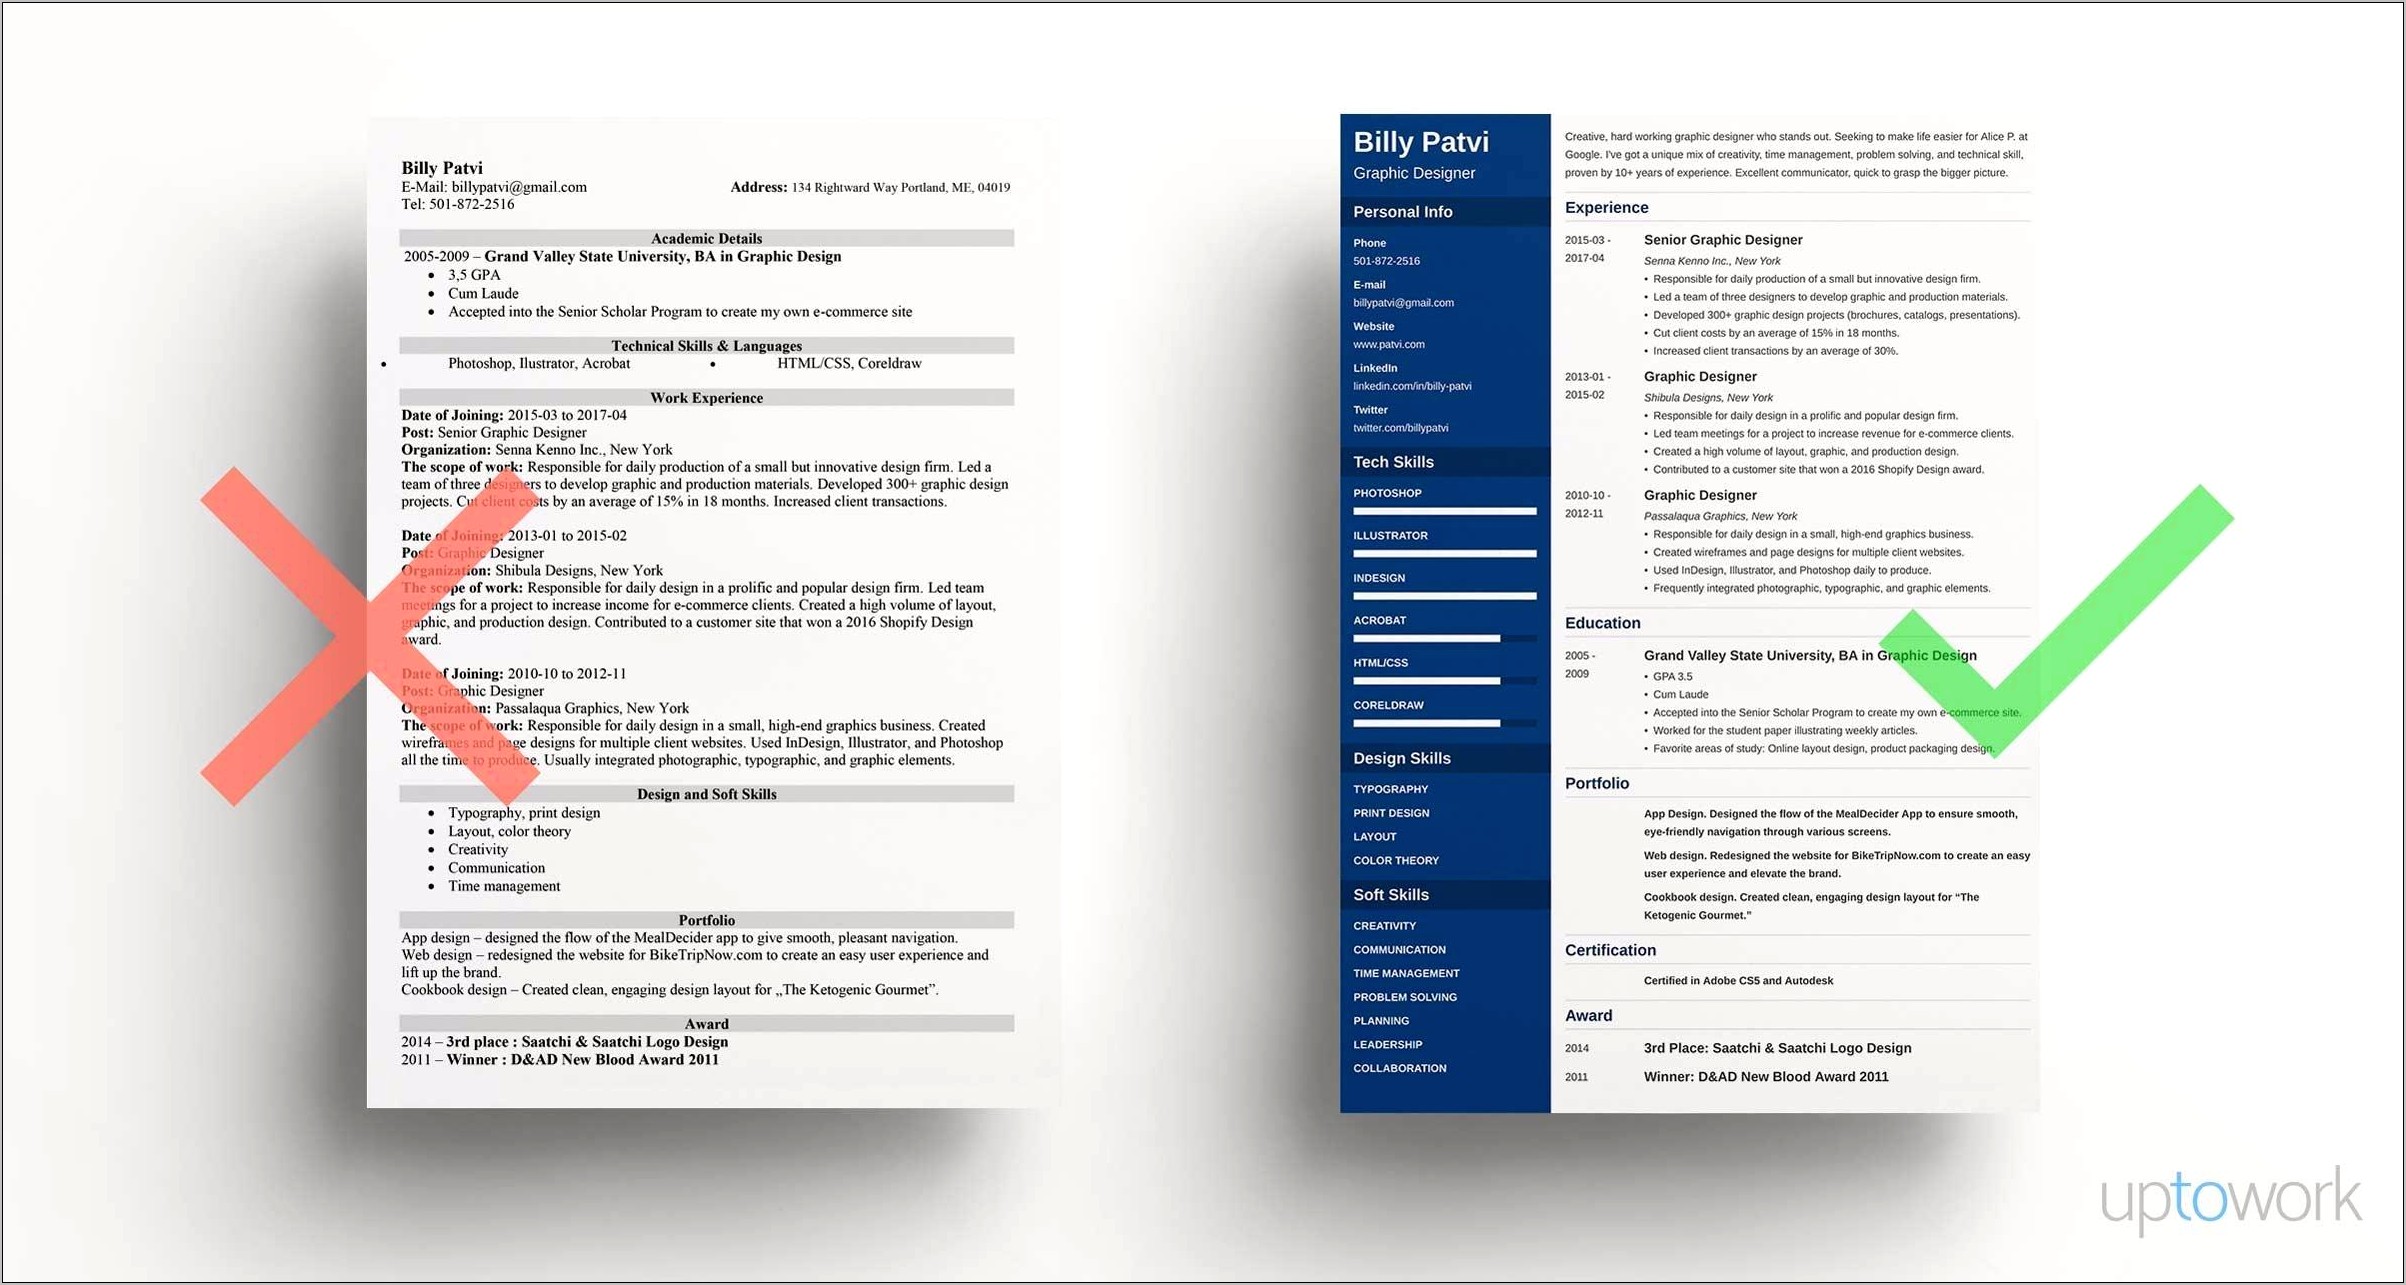 Resume Objective Examples For Graphic Designer